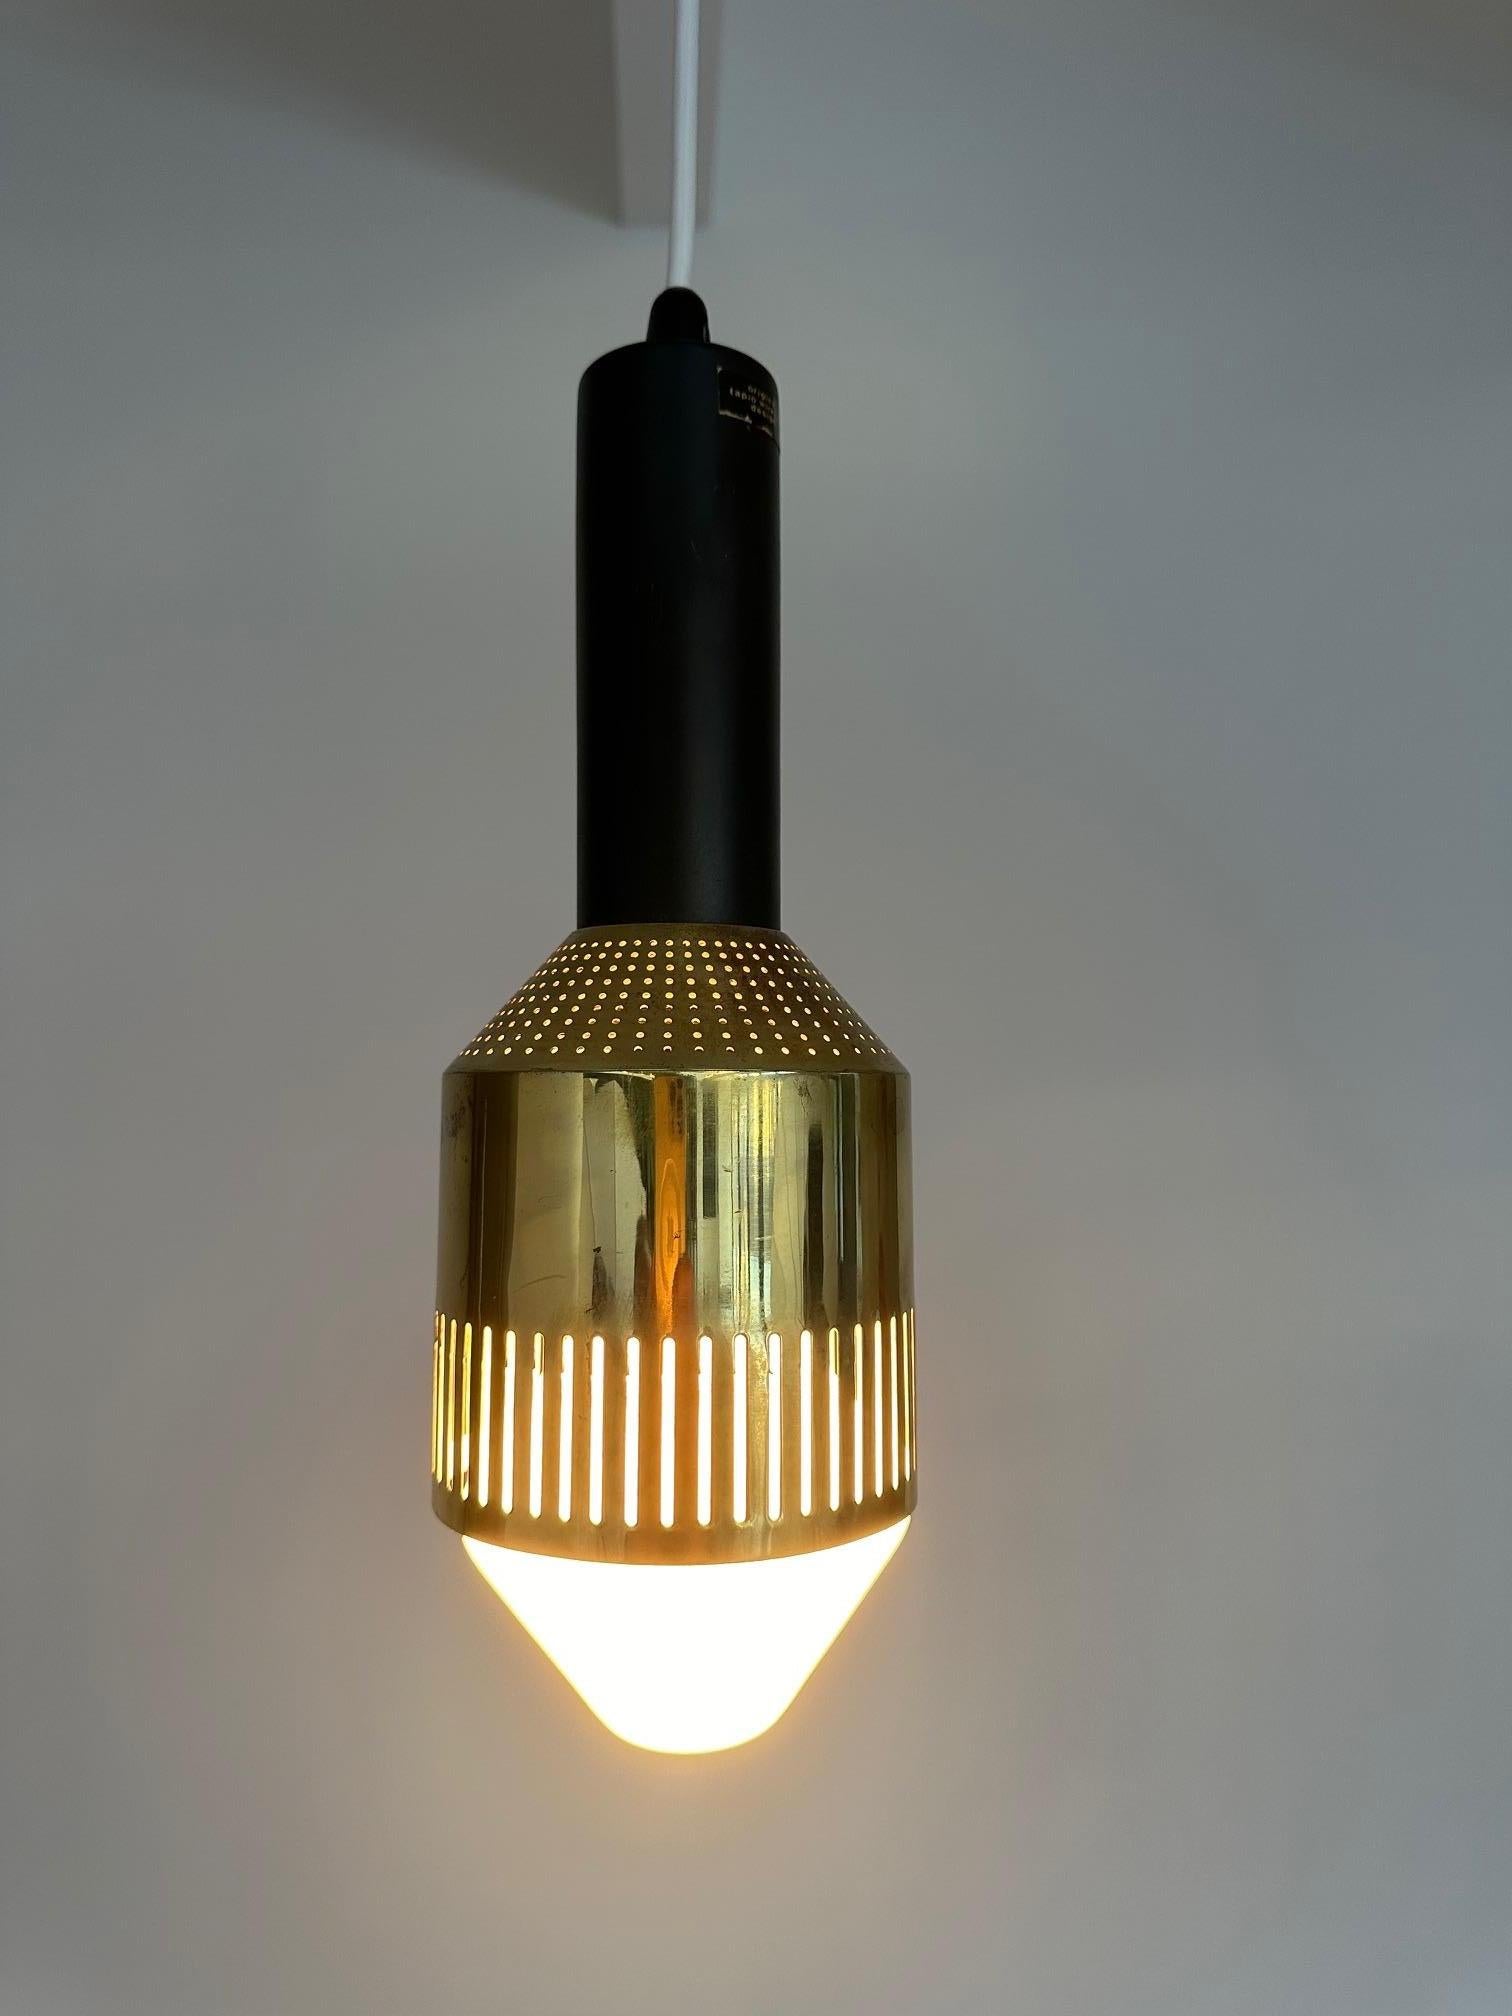 Rare ceiling lamp by Tapio Wirkkala with perforated brass shade and satin lacquered metal body,

Designed and manufactured between 1959 and 1961

The model is from a limited edition or a custom made model and carries label
Original Tapio Wirkkala